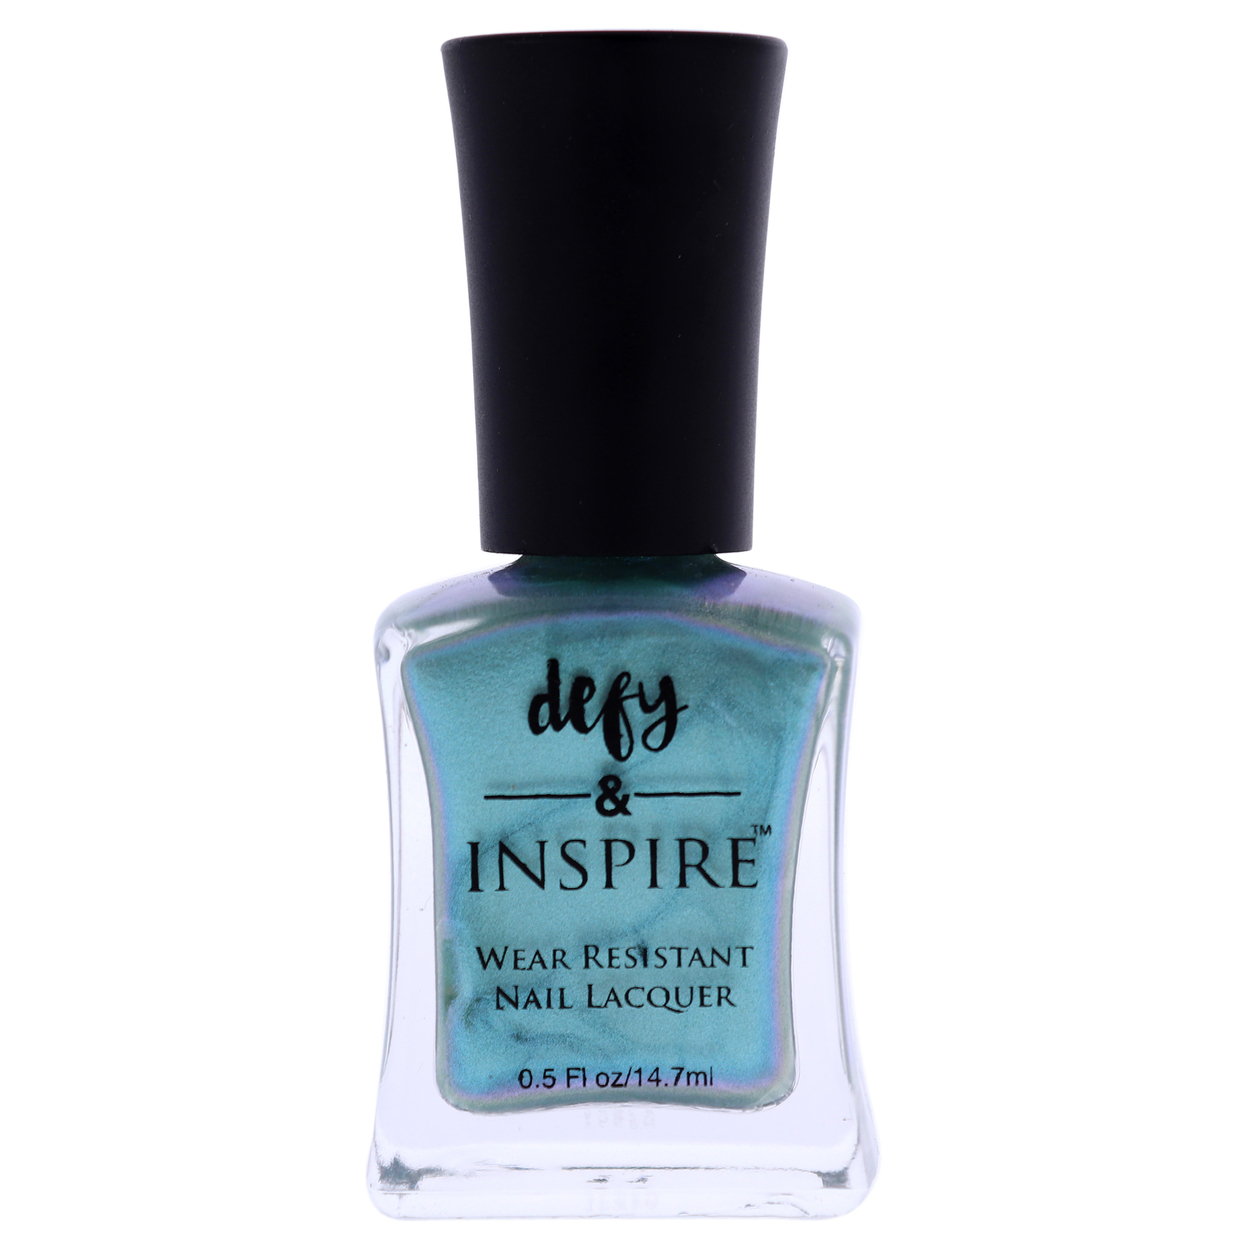 Defy And Inspire Wear Resistant Nail Lacquer - 513 Just Chilling Nail Polish 0.5 Oz